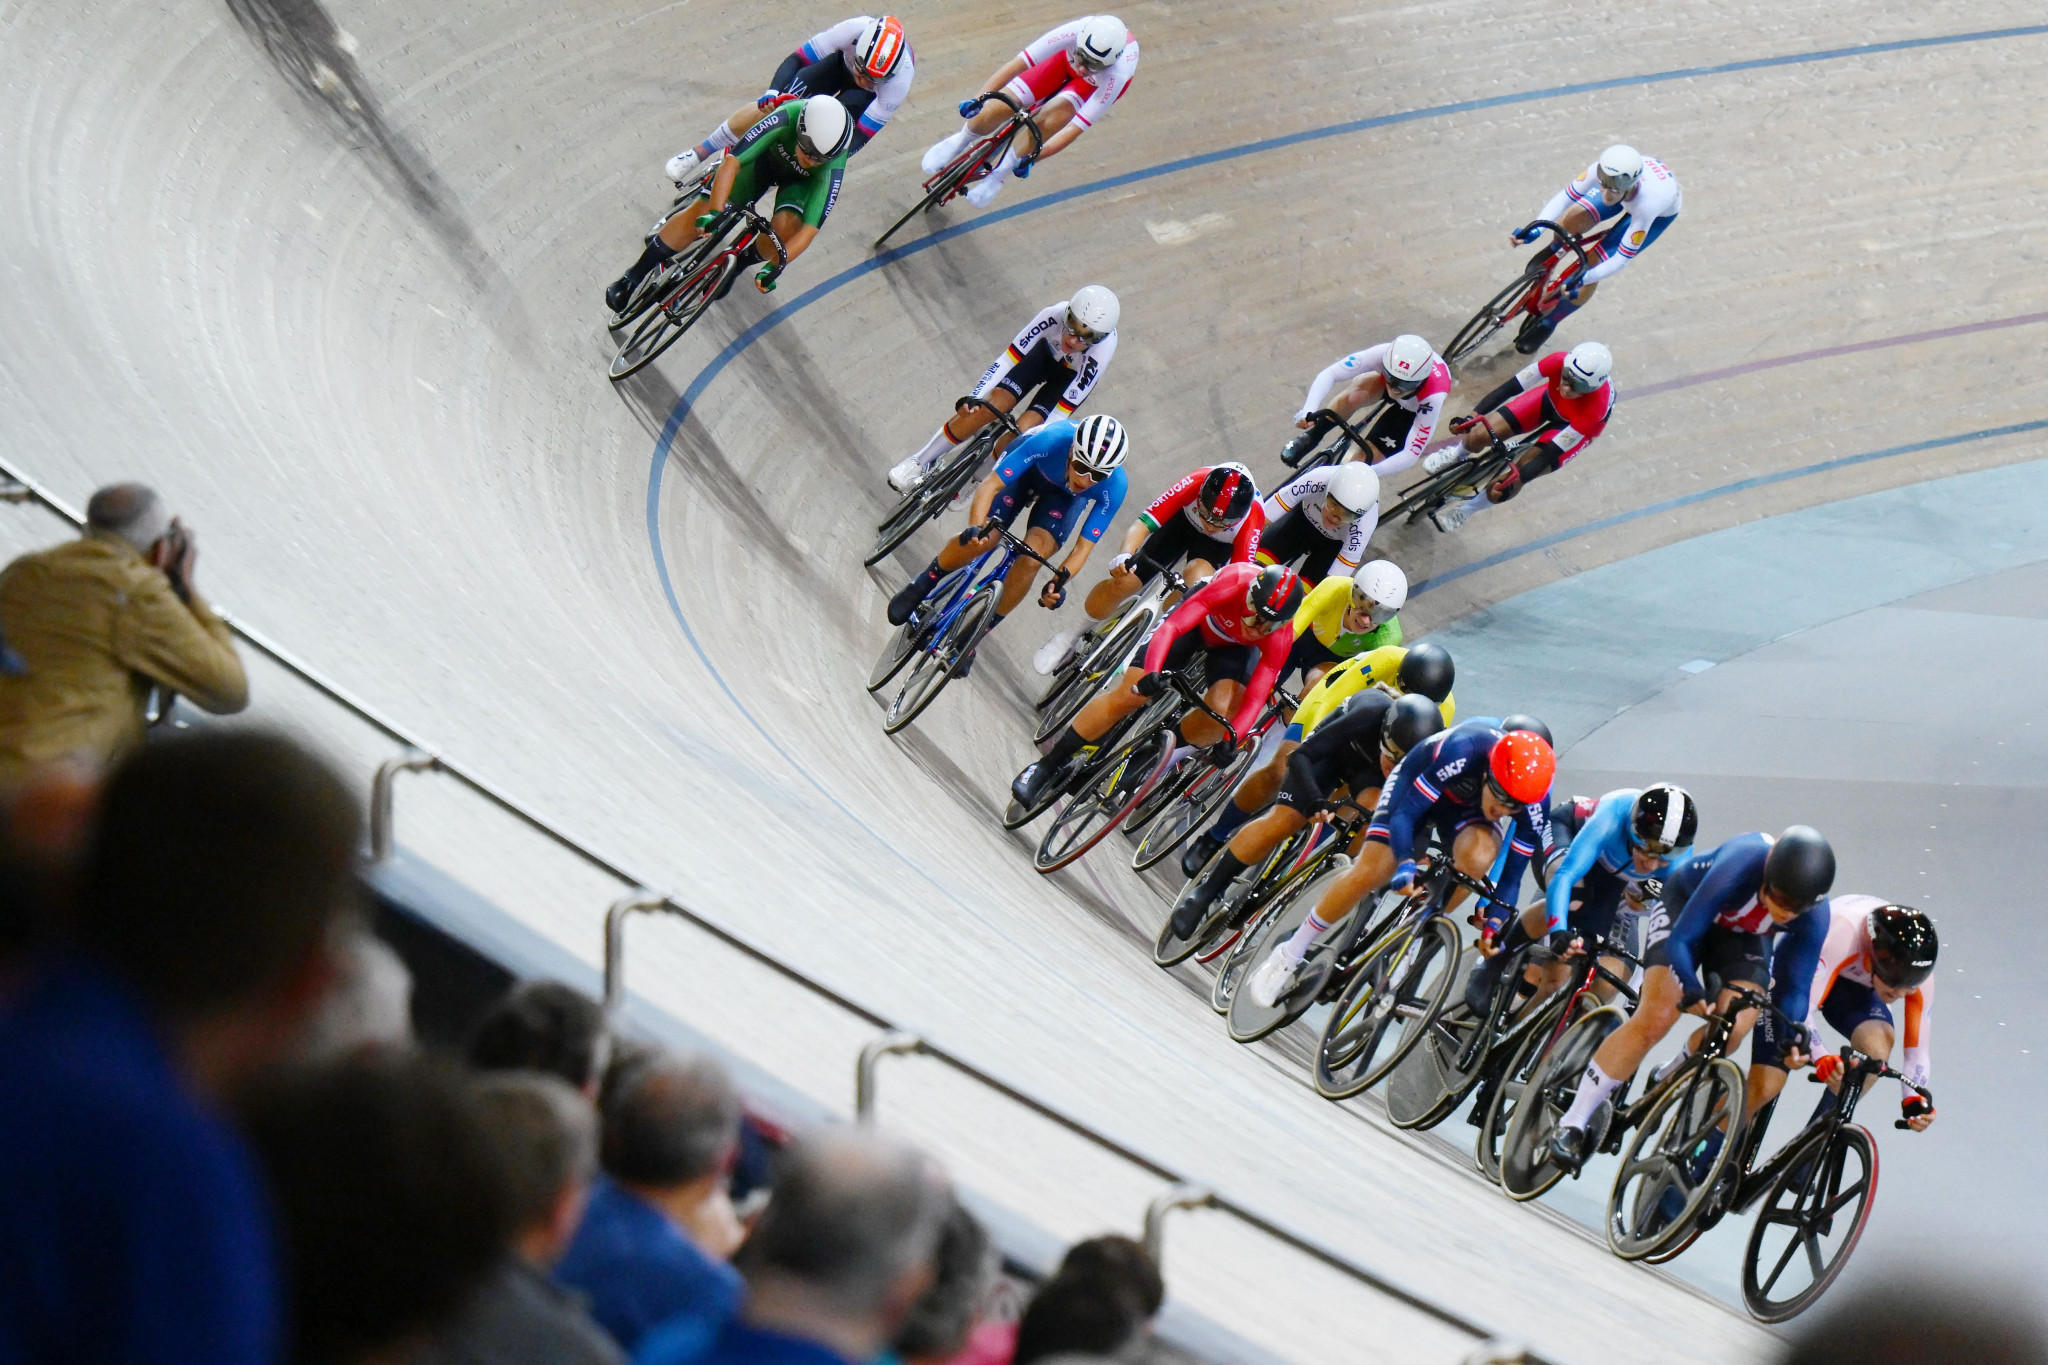 The men's and women's scratch races are both set to be held over 10km from 2025 among the changes to track cycling distances approved by the UCI Management Committee ©Getty Images